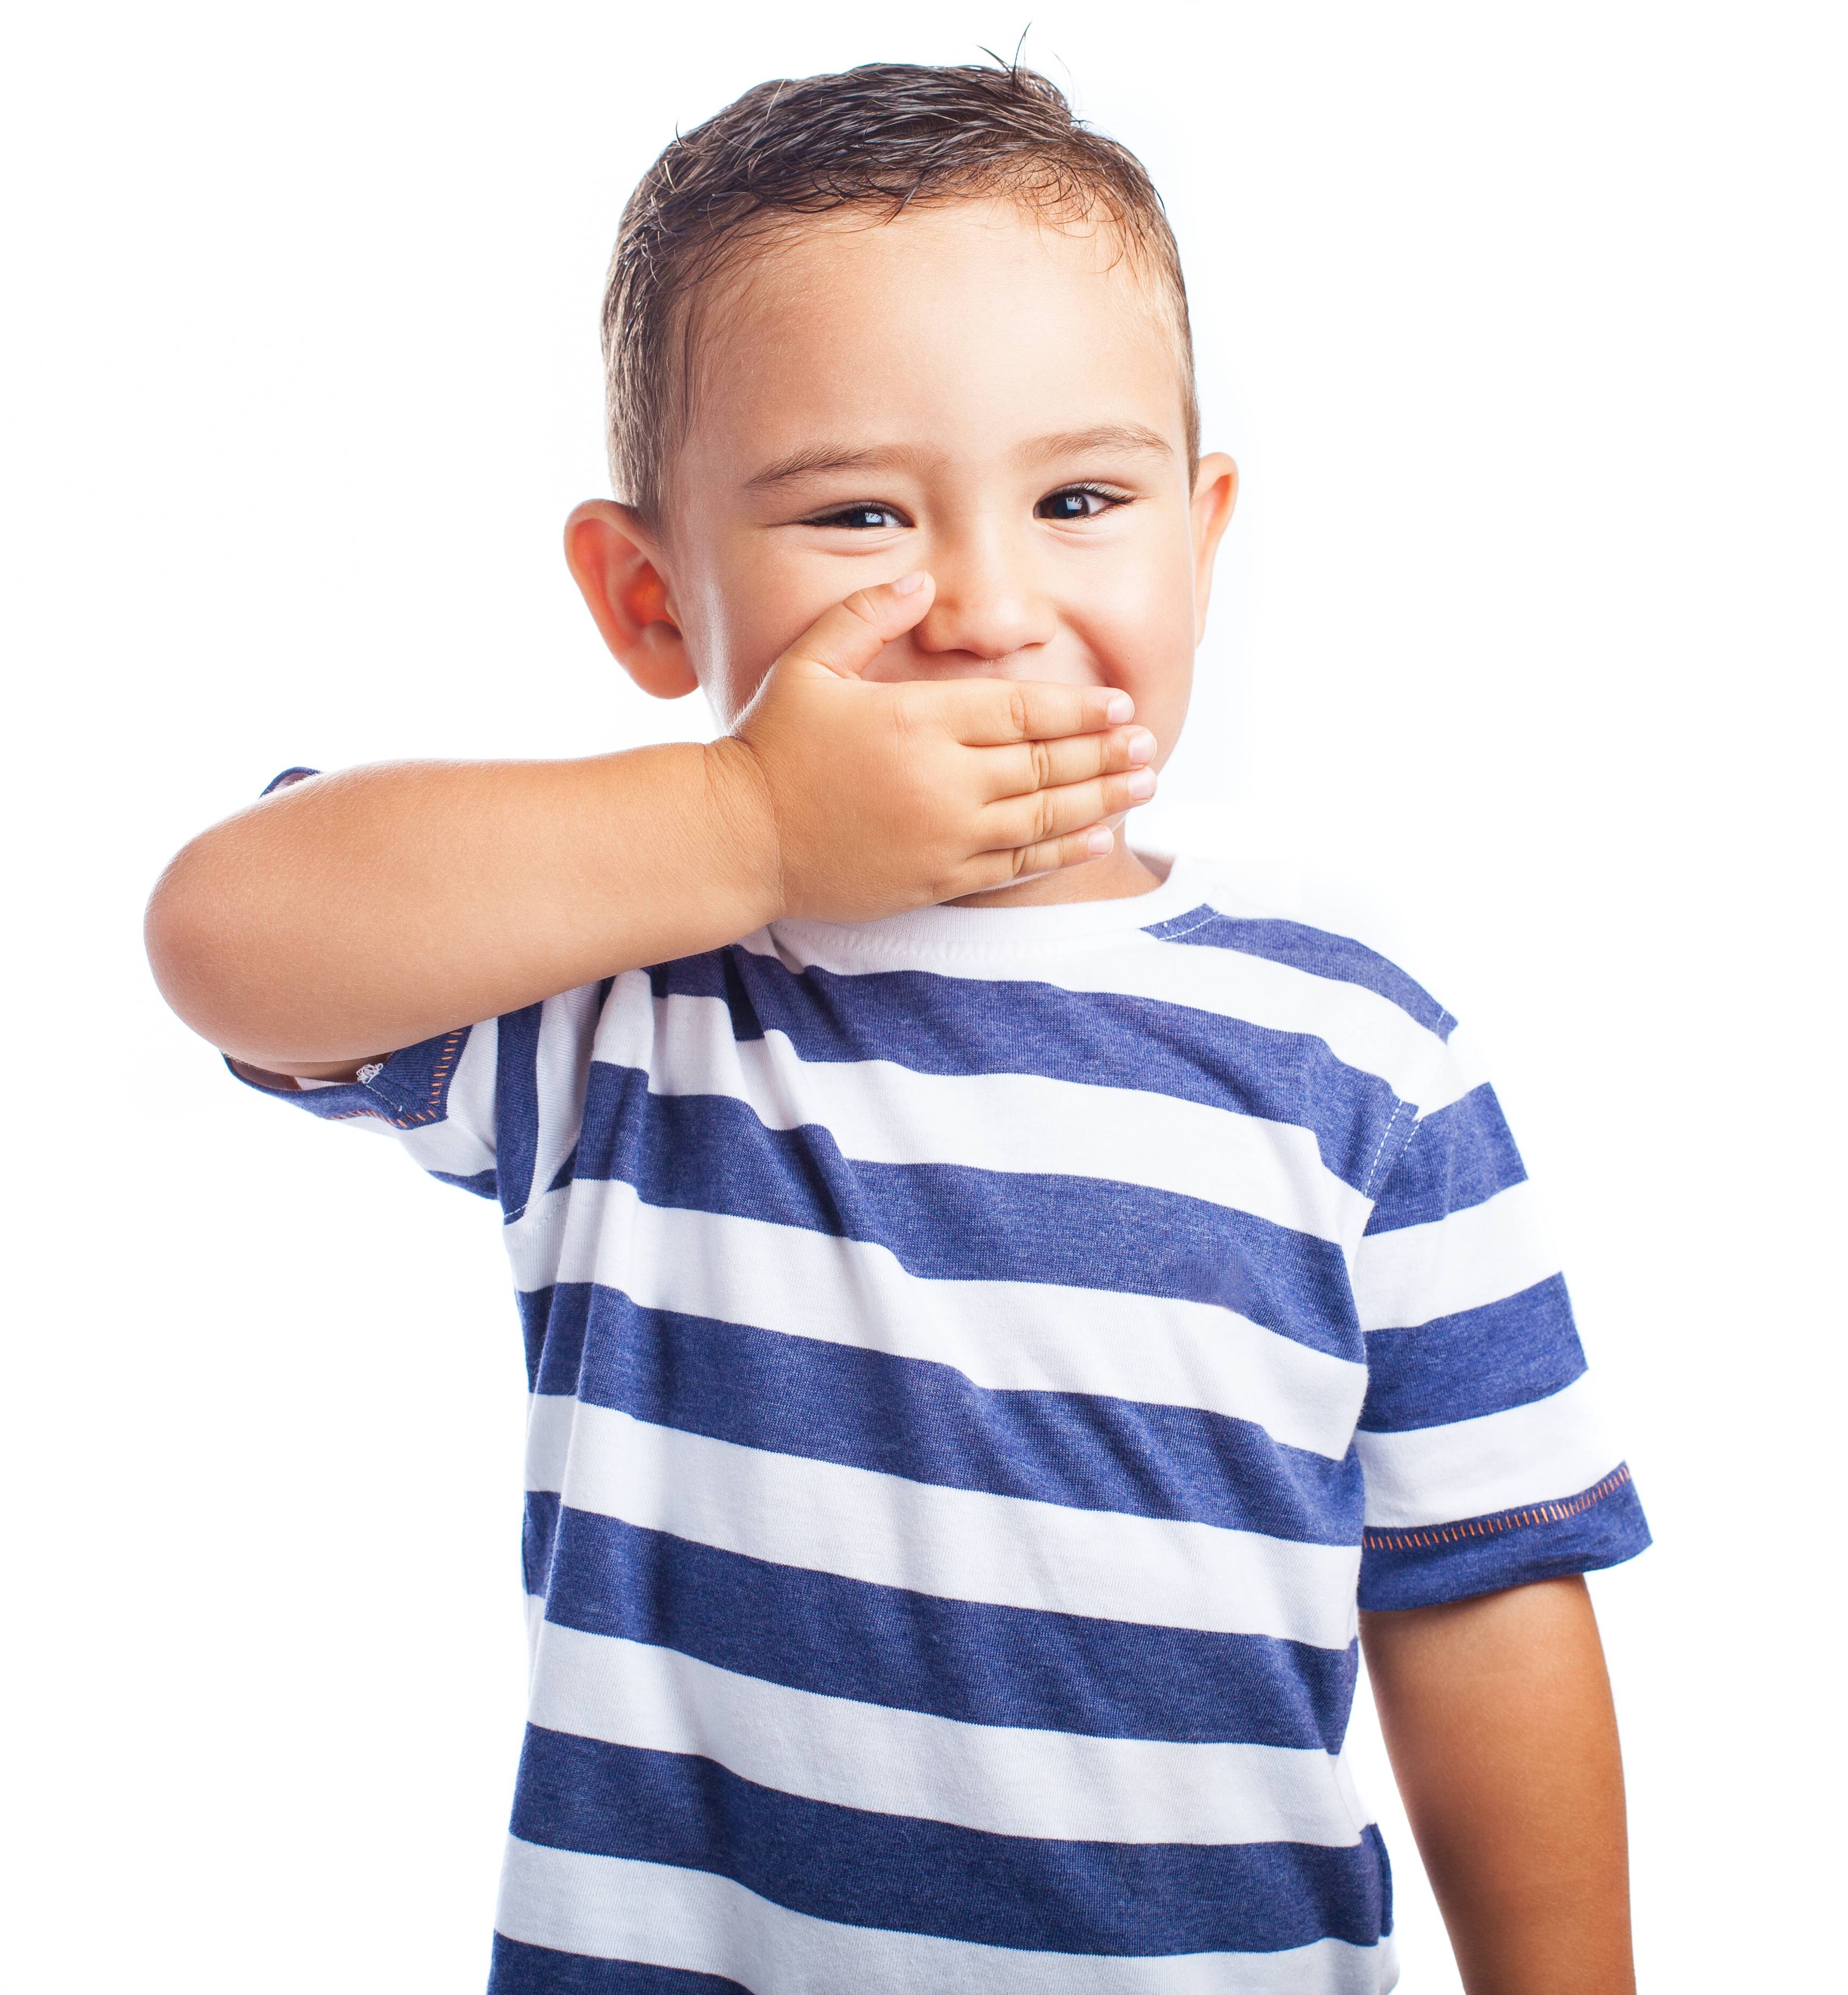 Little boy covering mouth